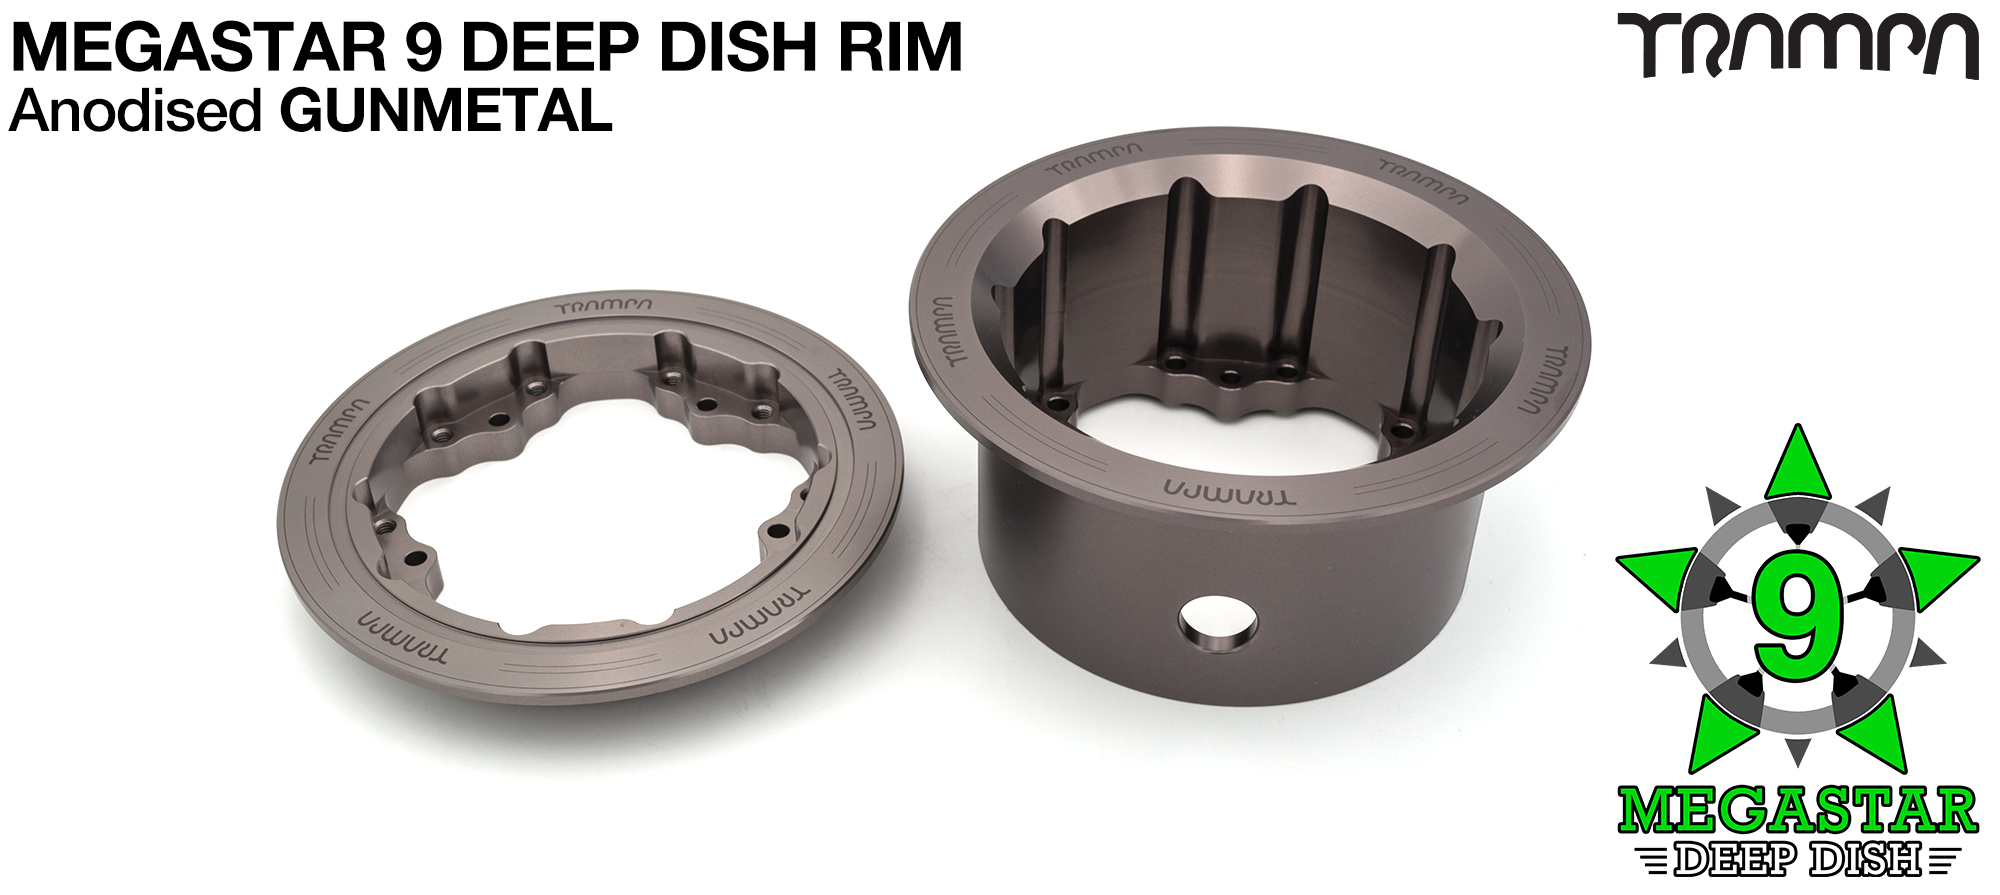 MEGASTAR 9 DEEP-DISH Rims Measure 3.75/4x 3 Inch. The Bearings are positioned OFF-SET & accept 4 Inch Rim Tyres to make 9 or 10 inch Wheels - GUNMETAL